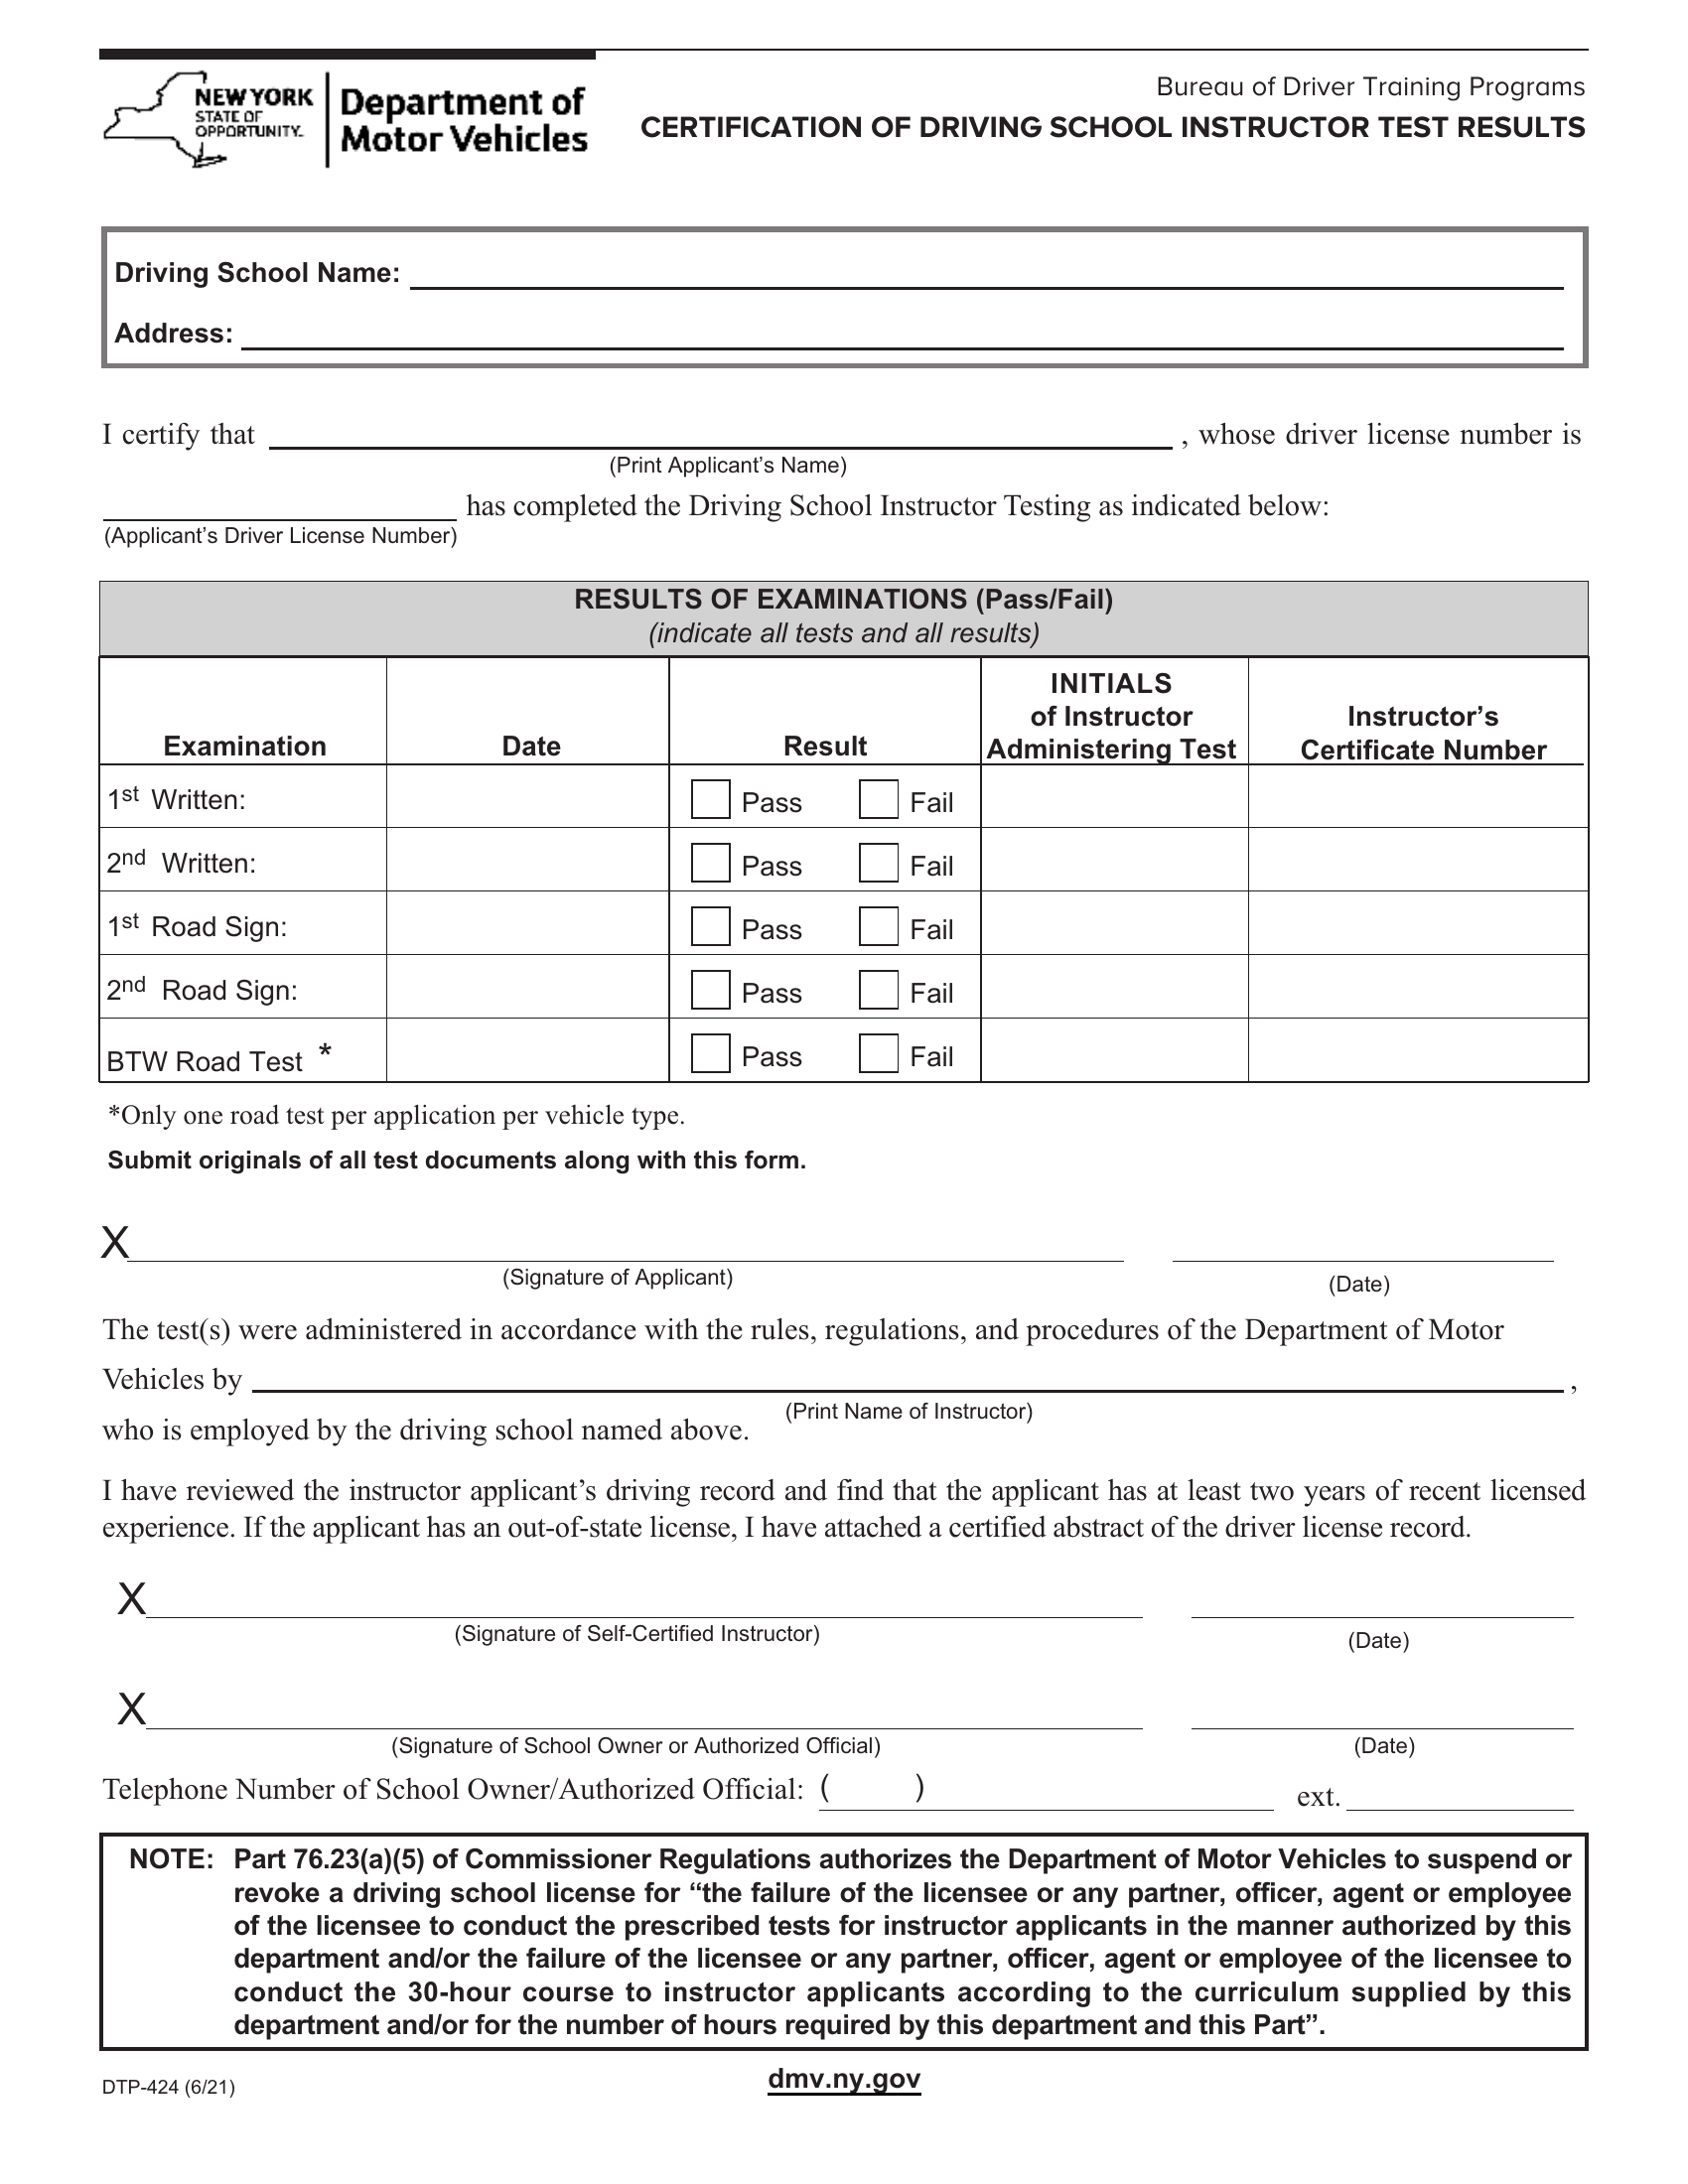 NYS DMV Form DTP-424. Certification of Driving School Instructor Test  Results